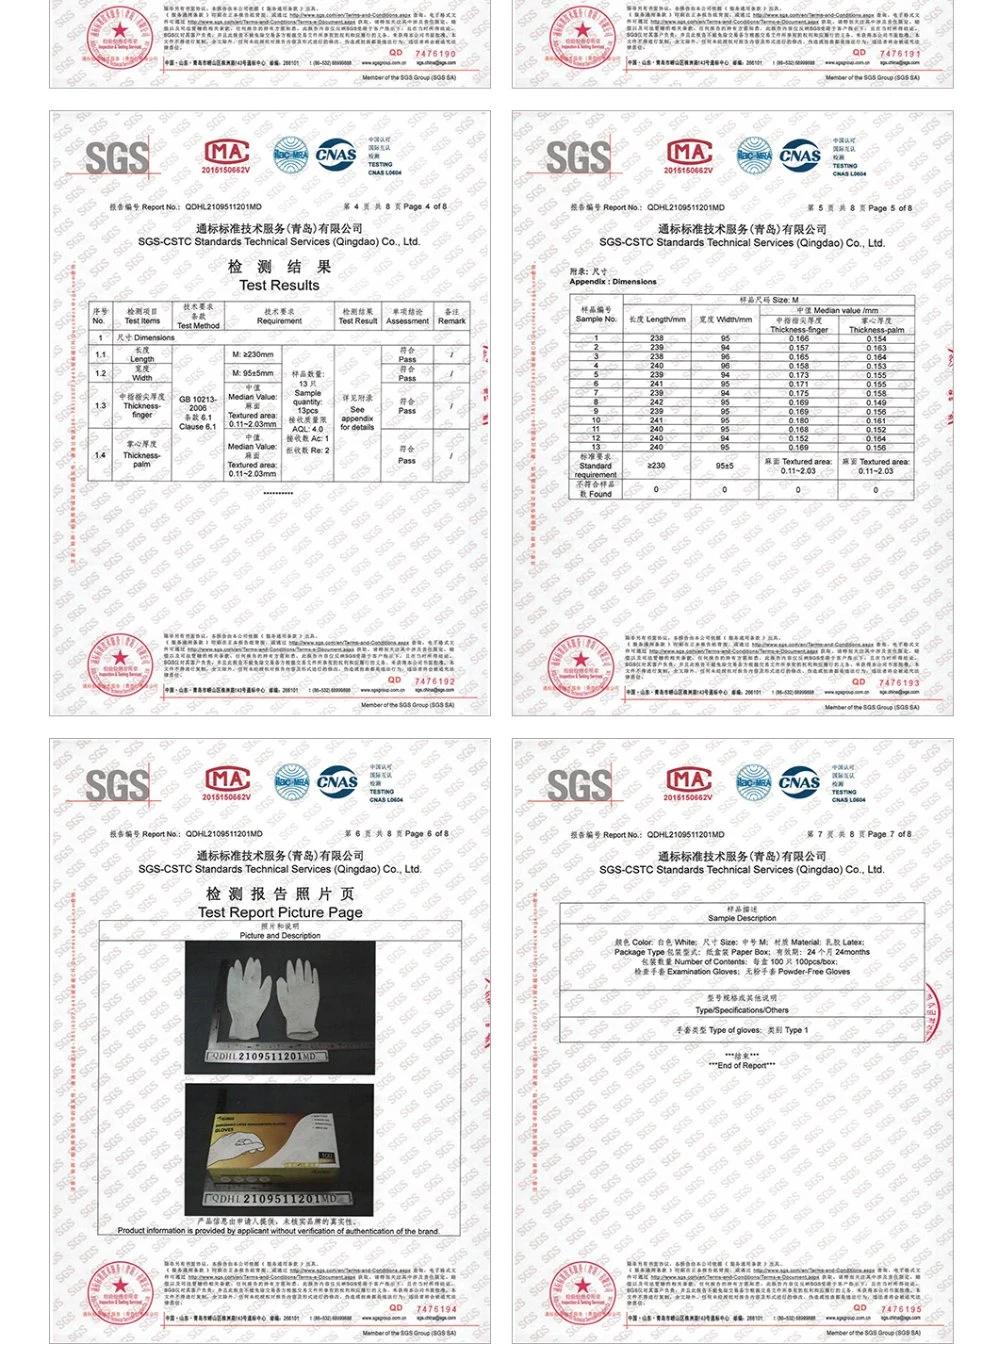 EU Certified Factory Produces High-Quality Natural Latex Gloves for Environmental Protection and Disposable Medical Examination Large Gloves